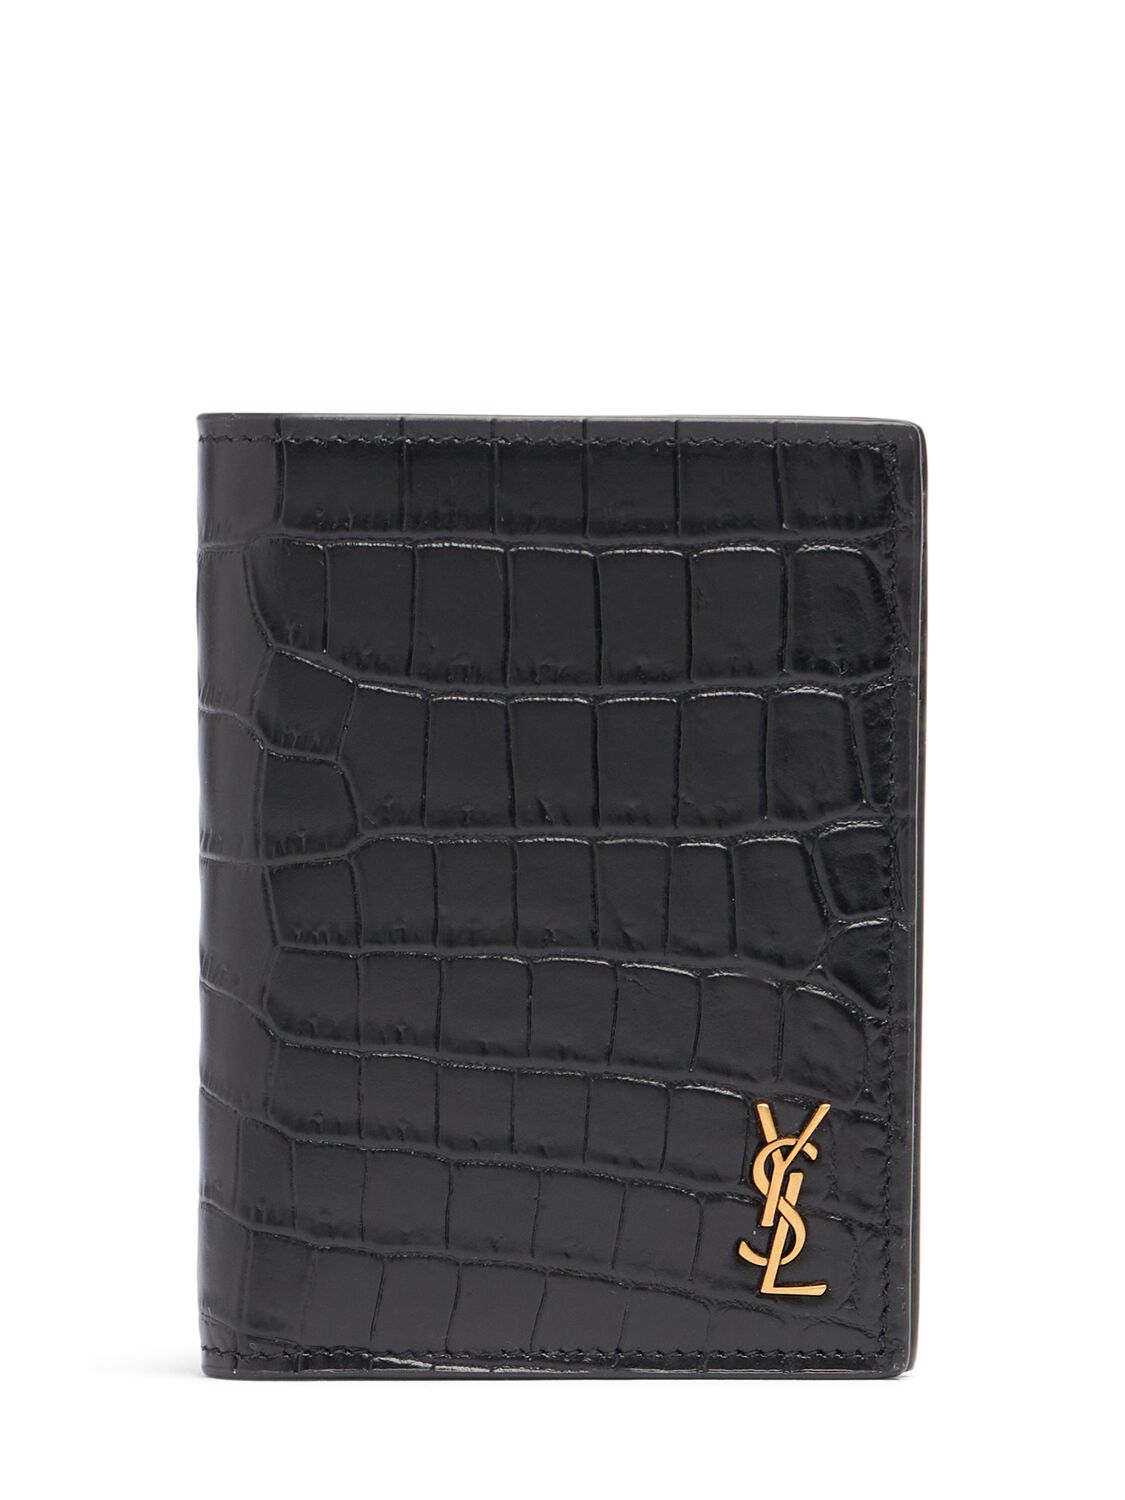 Ysl Leather Wallet